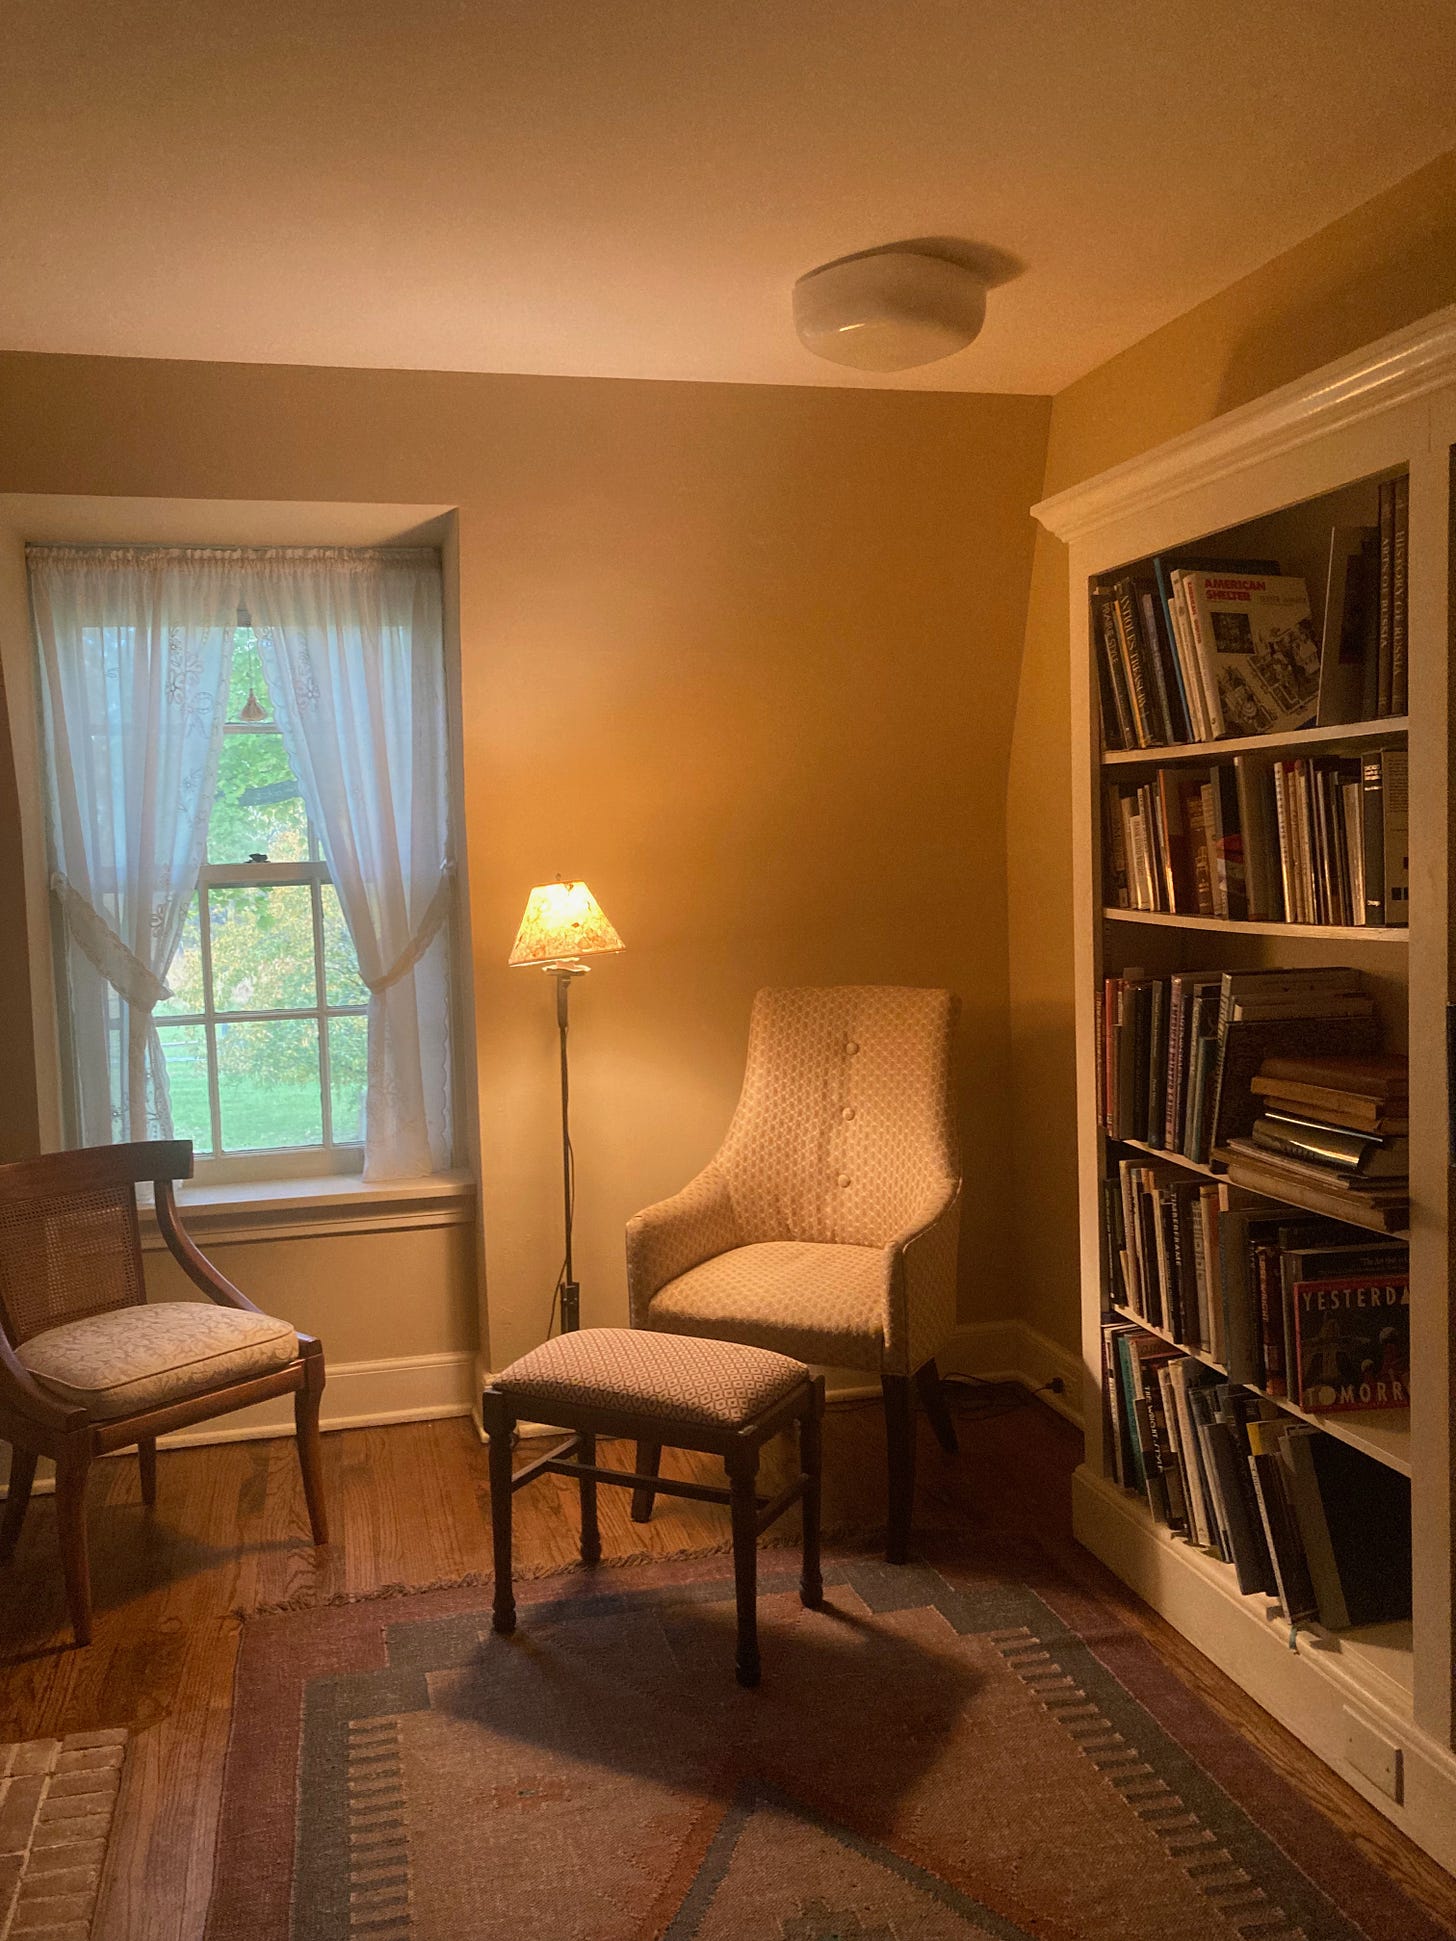 Two chairs next to a big bookshelf - a small cozy library